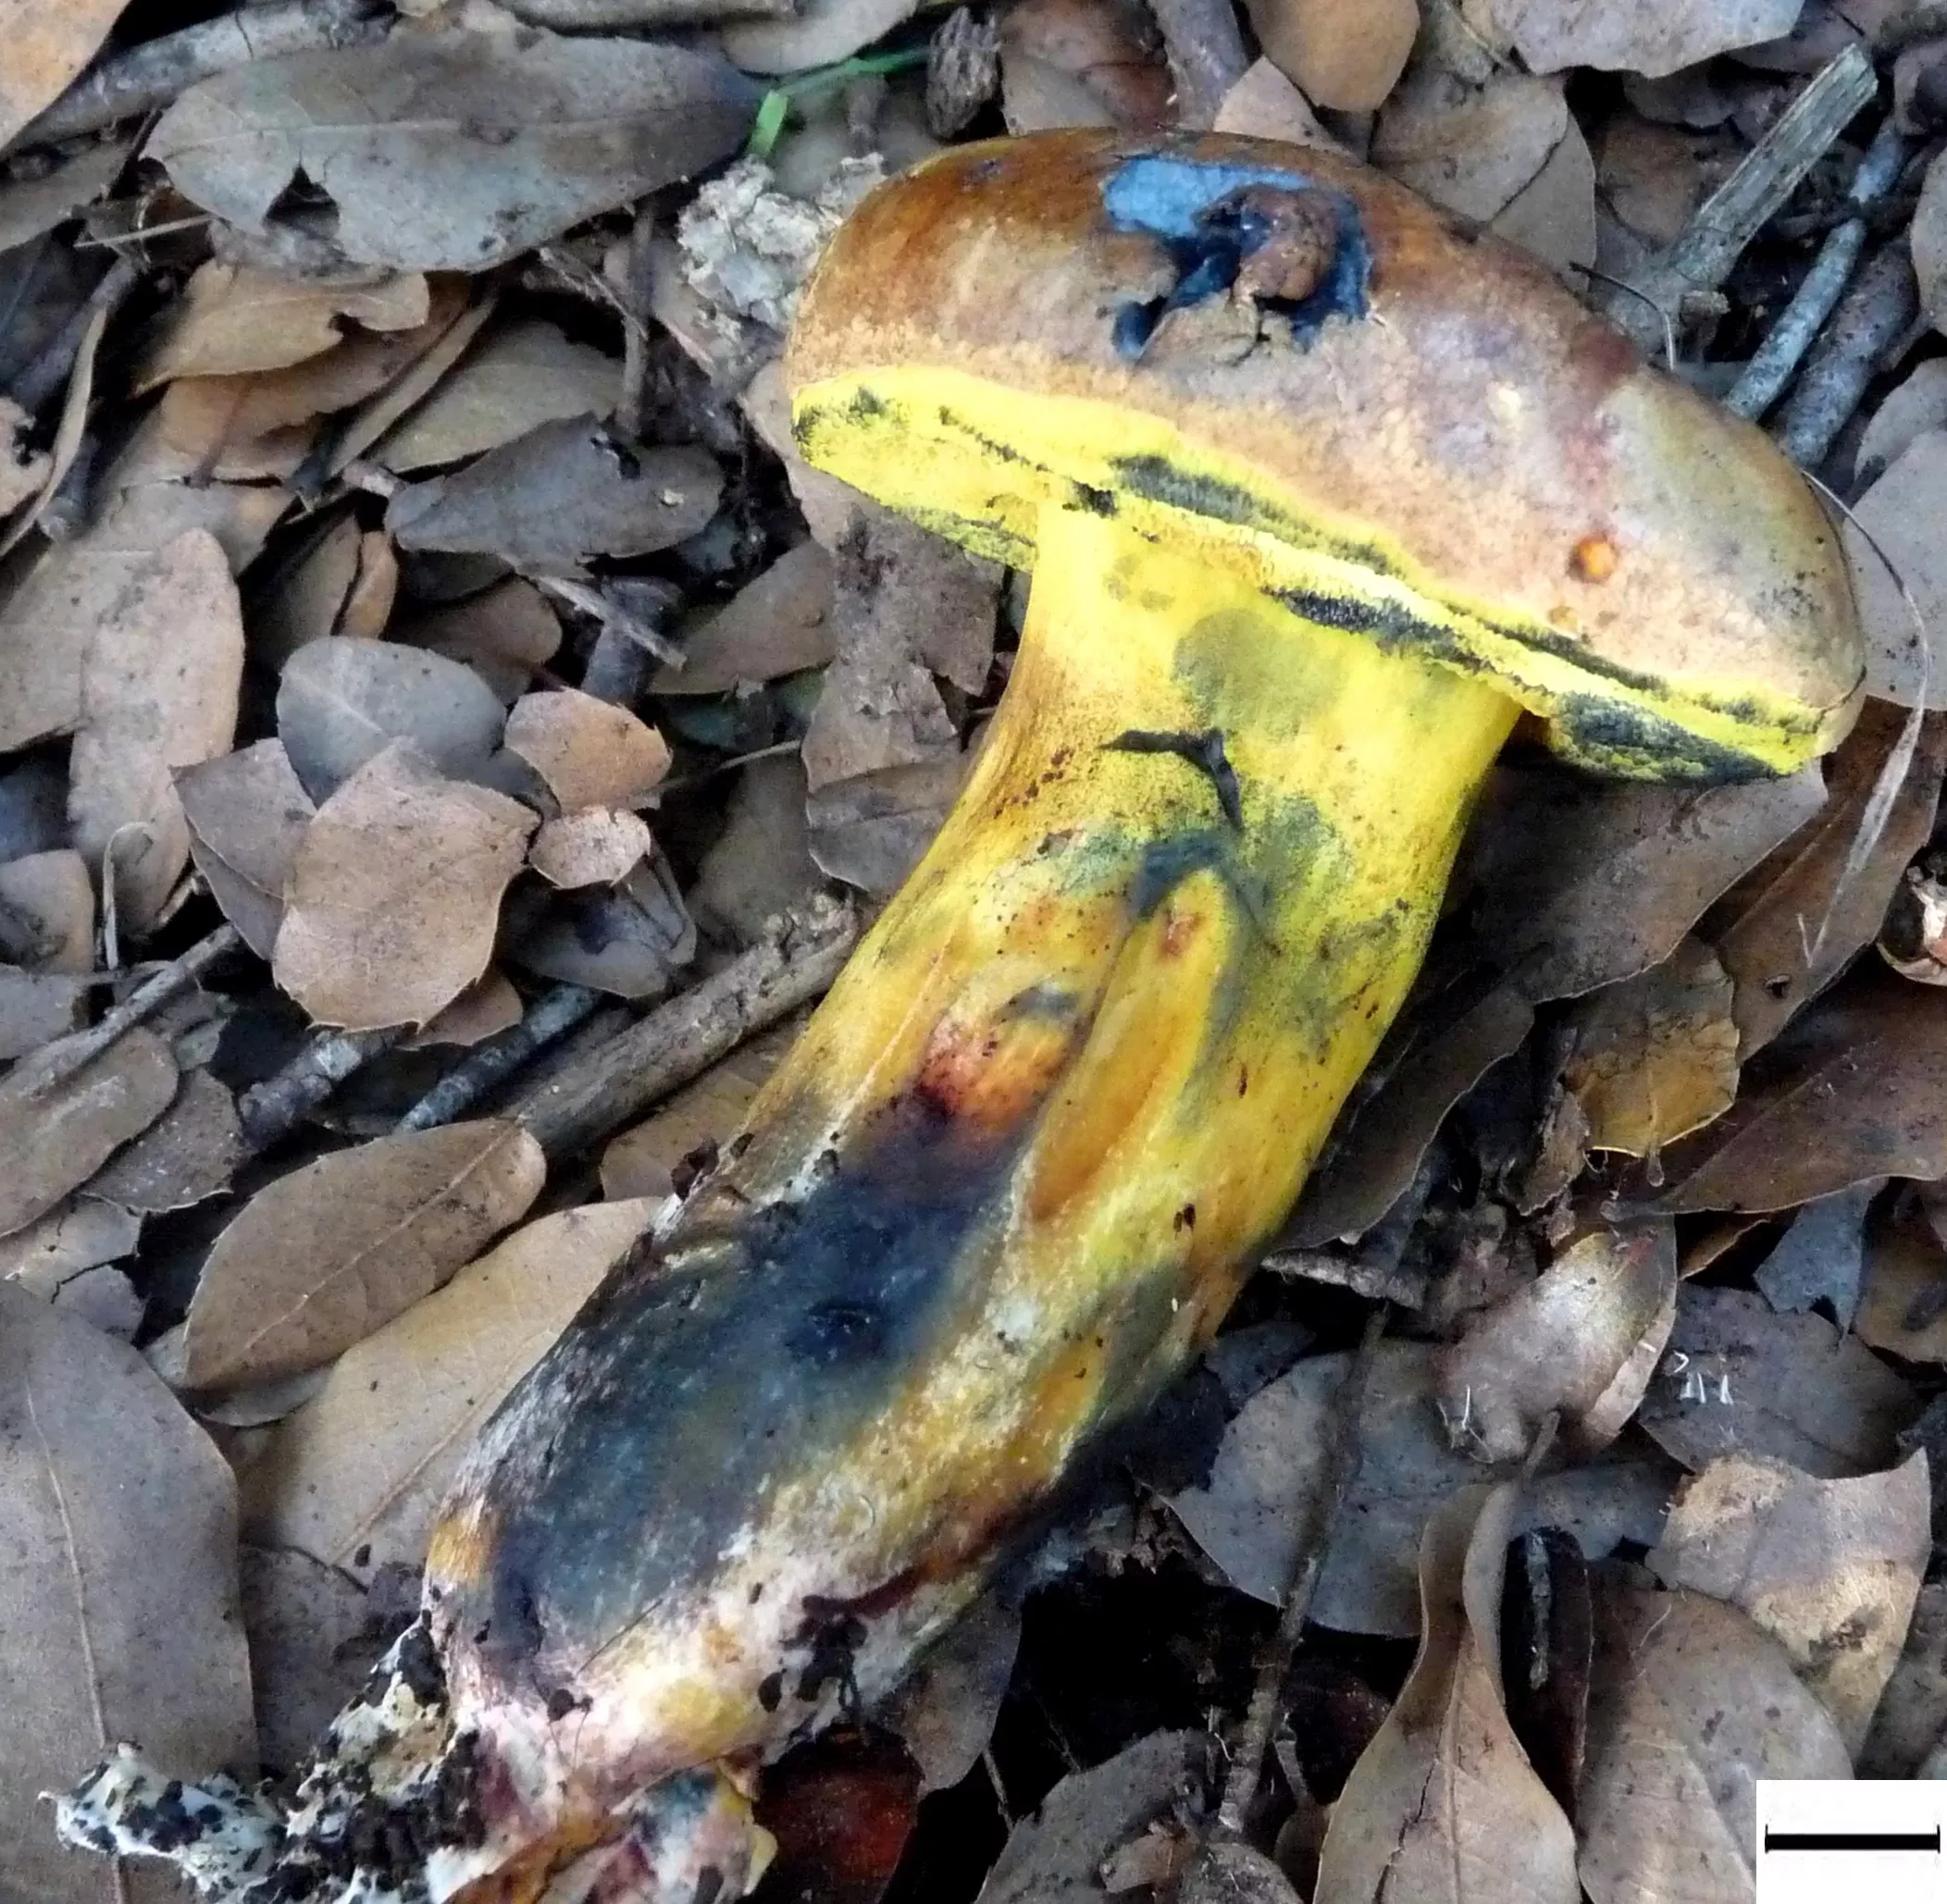 This mushroom is in a bad way indeed. In a stage of decomposition its base and cap have begun to rot, though its traditional mushroom shape are still visible